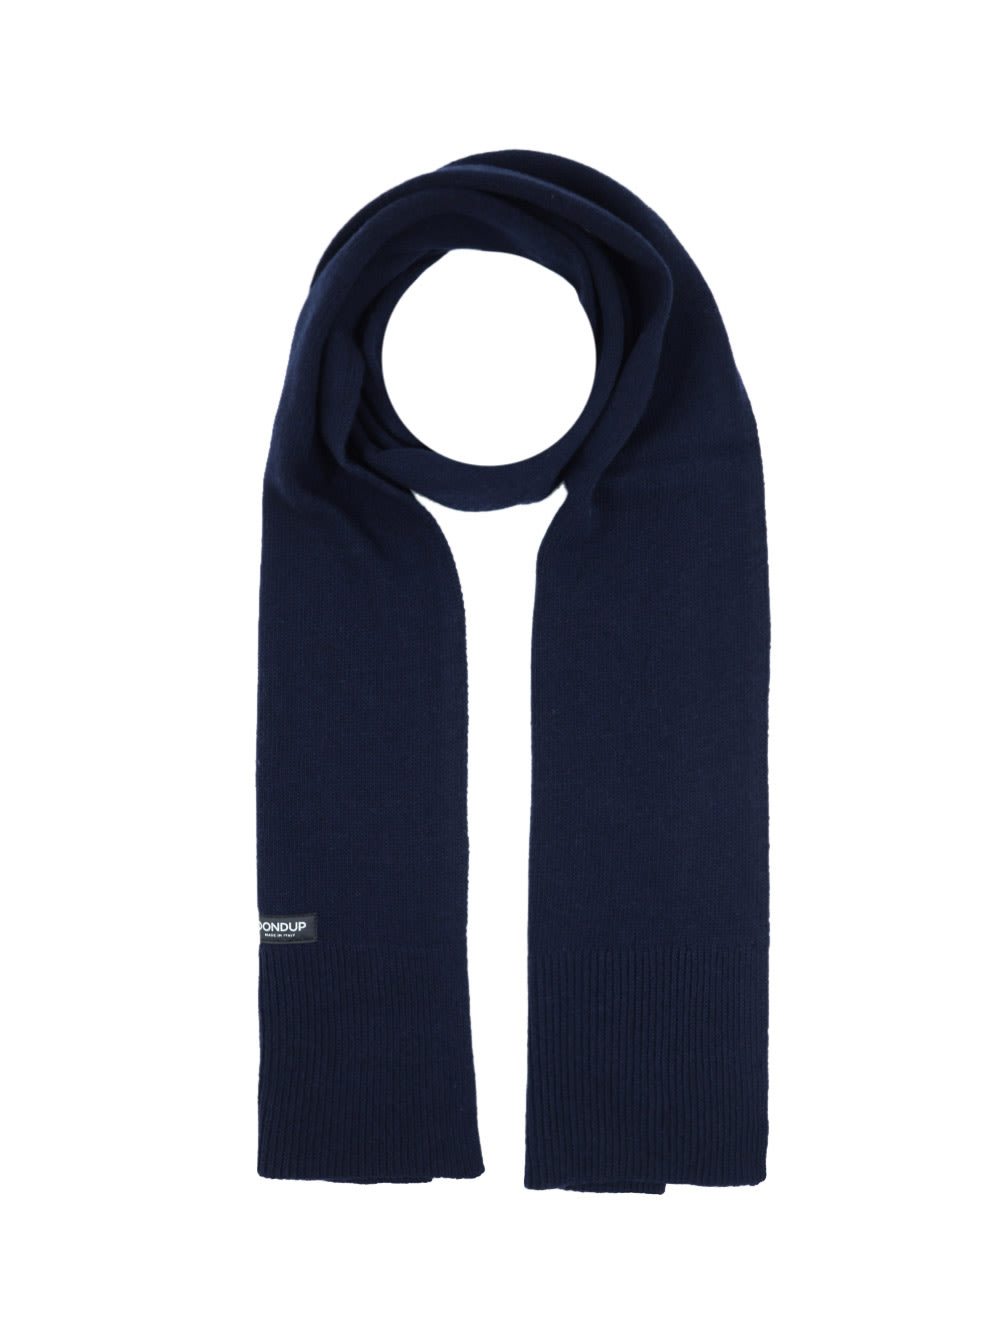 DONDUP CASHMERE SCARF